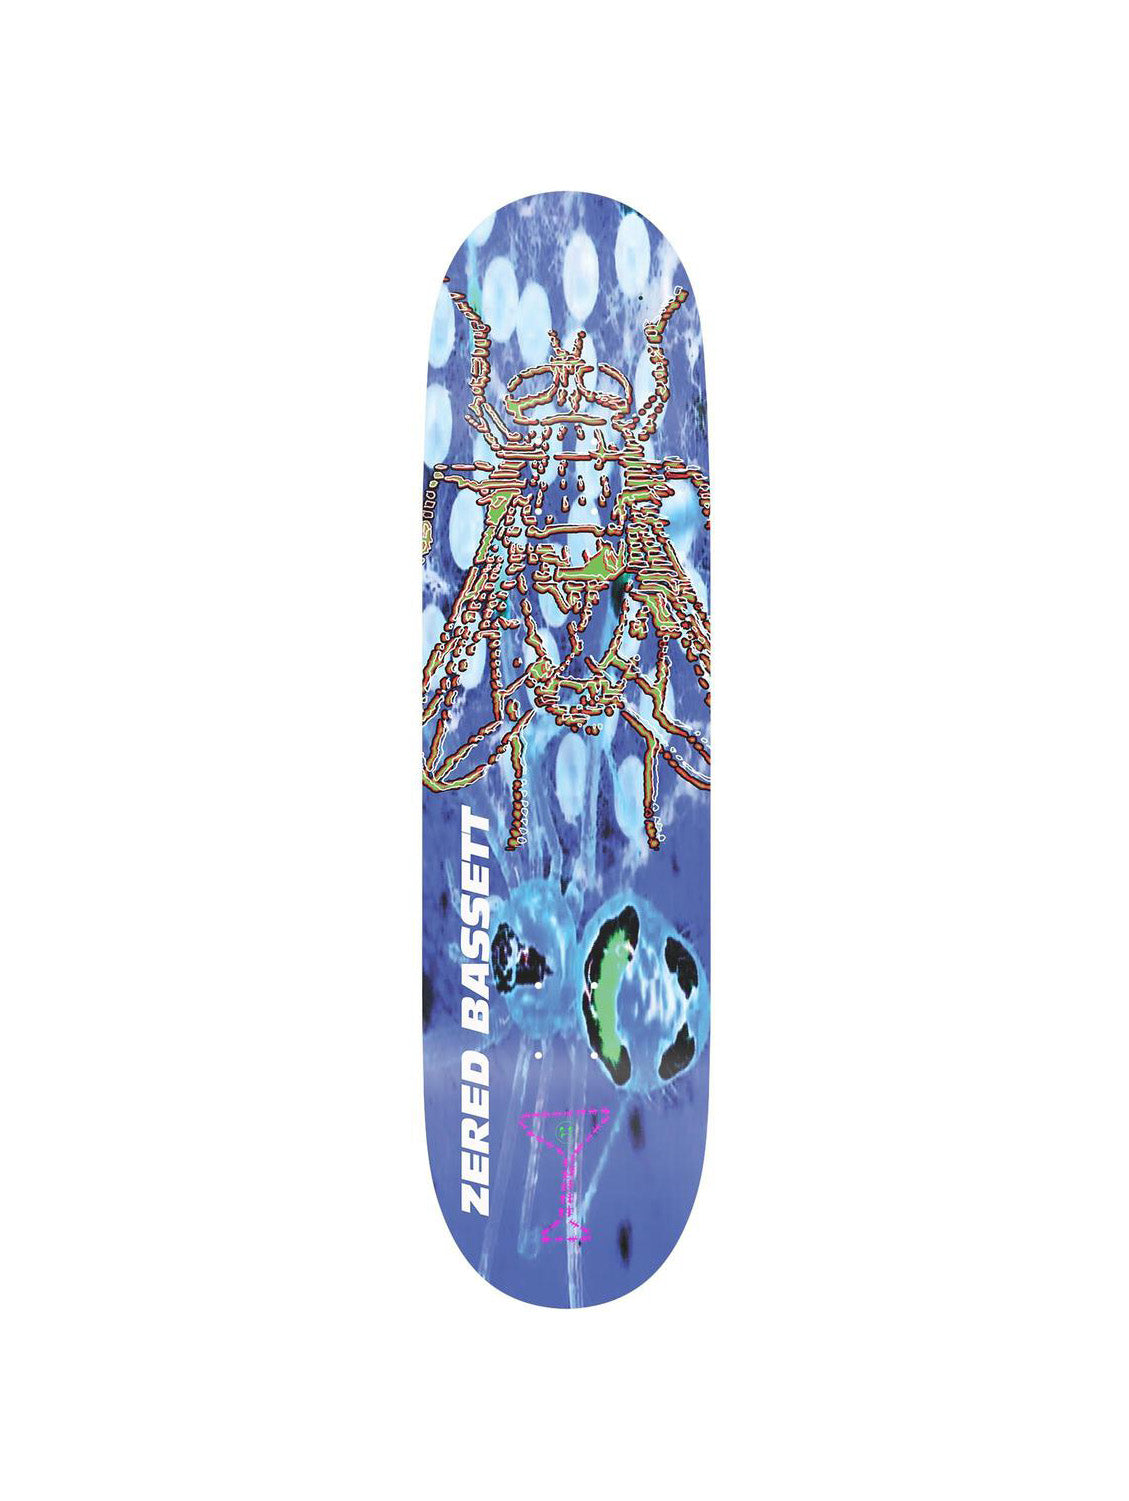 Alltimers Bugs Life Board Zered - 8.3"